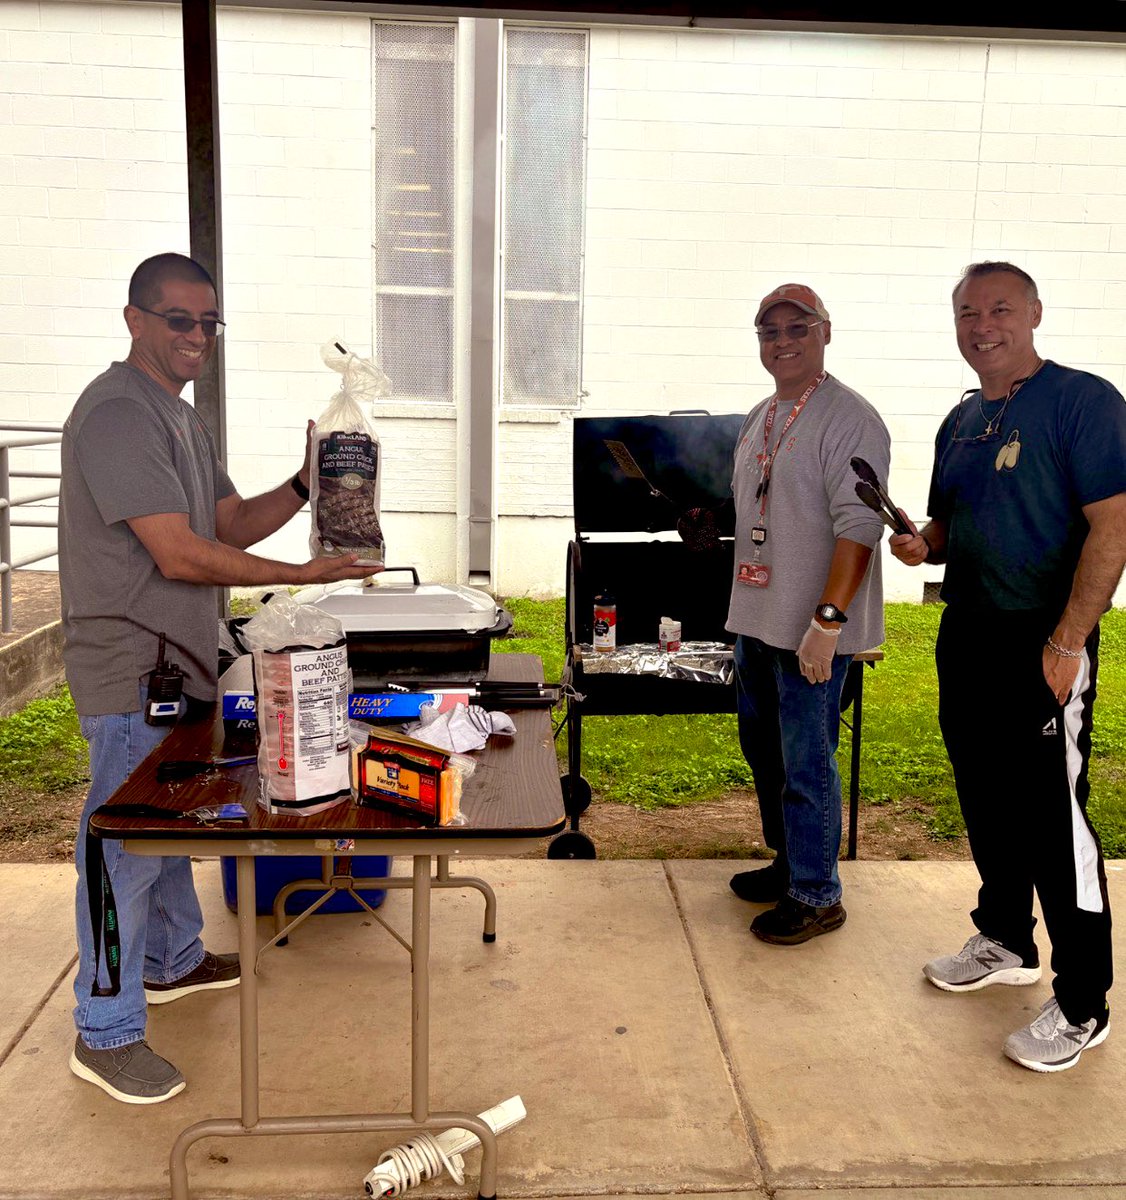 Our Specials team is helping us celebrate reaching our @UnitedWaySATX goal, 100% staff participation, by grilling burgers for the whole staff today @PeralesESchool!